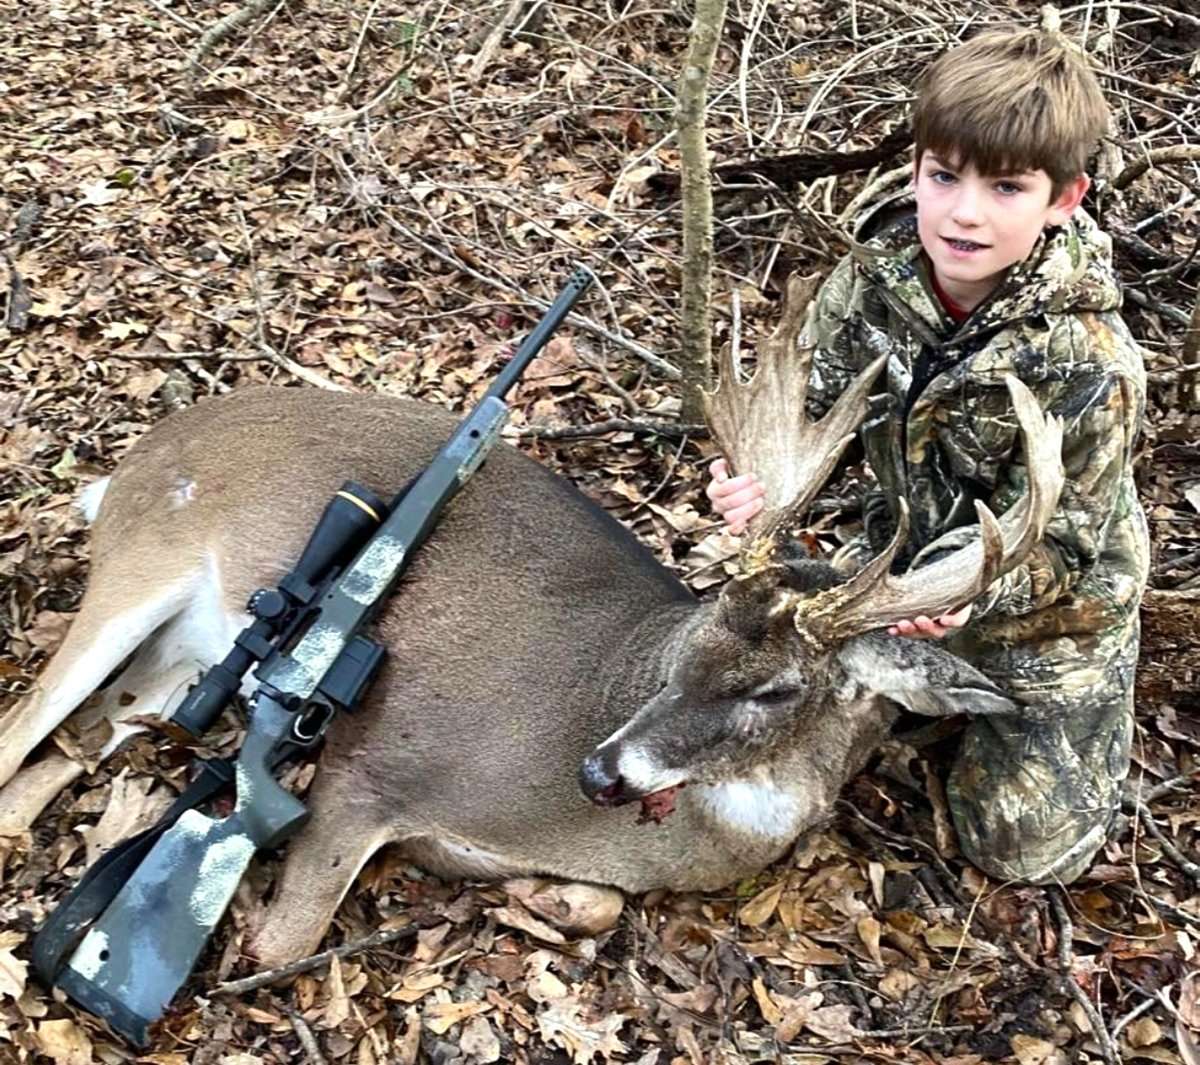 Fisher Brown and his grandfather had chased the buck for 3 seasons.